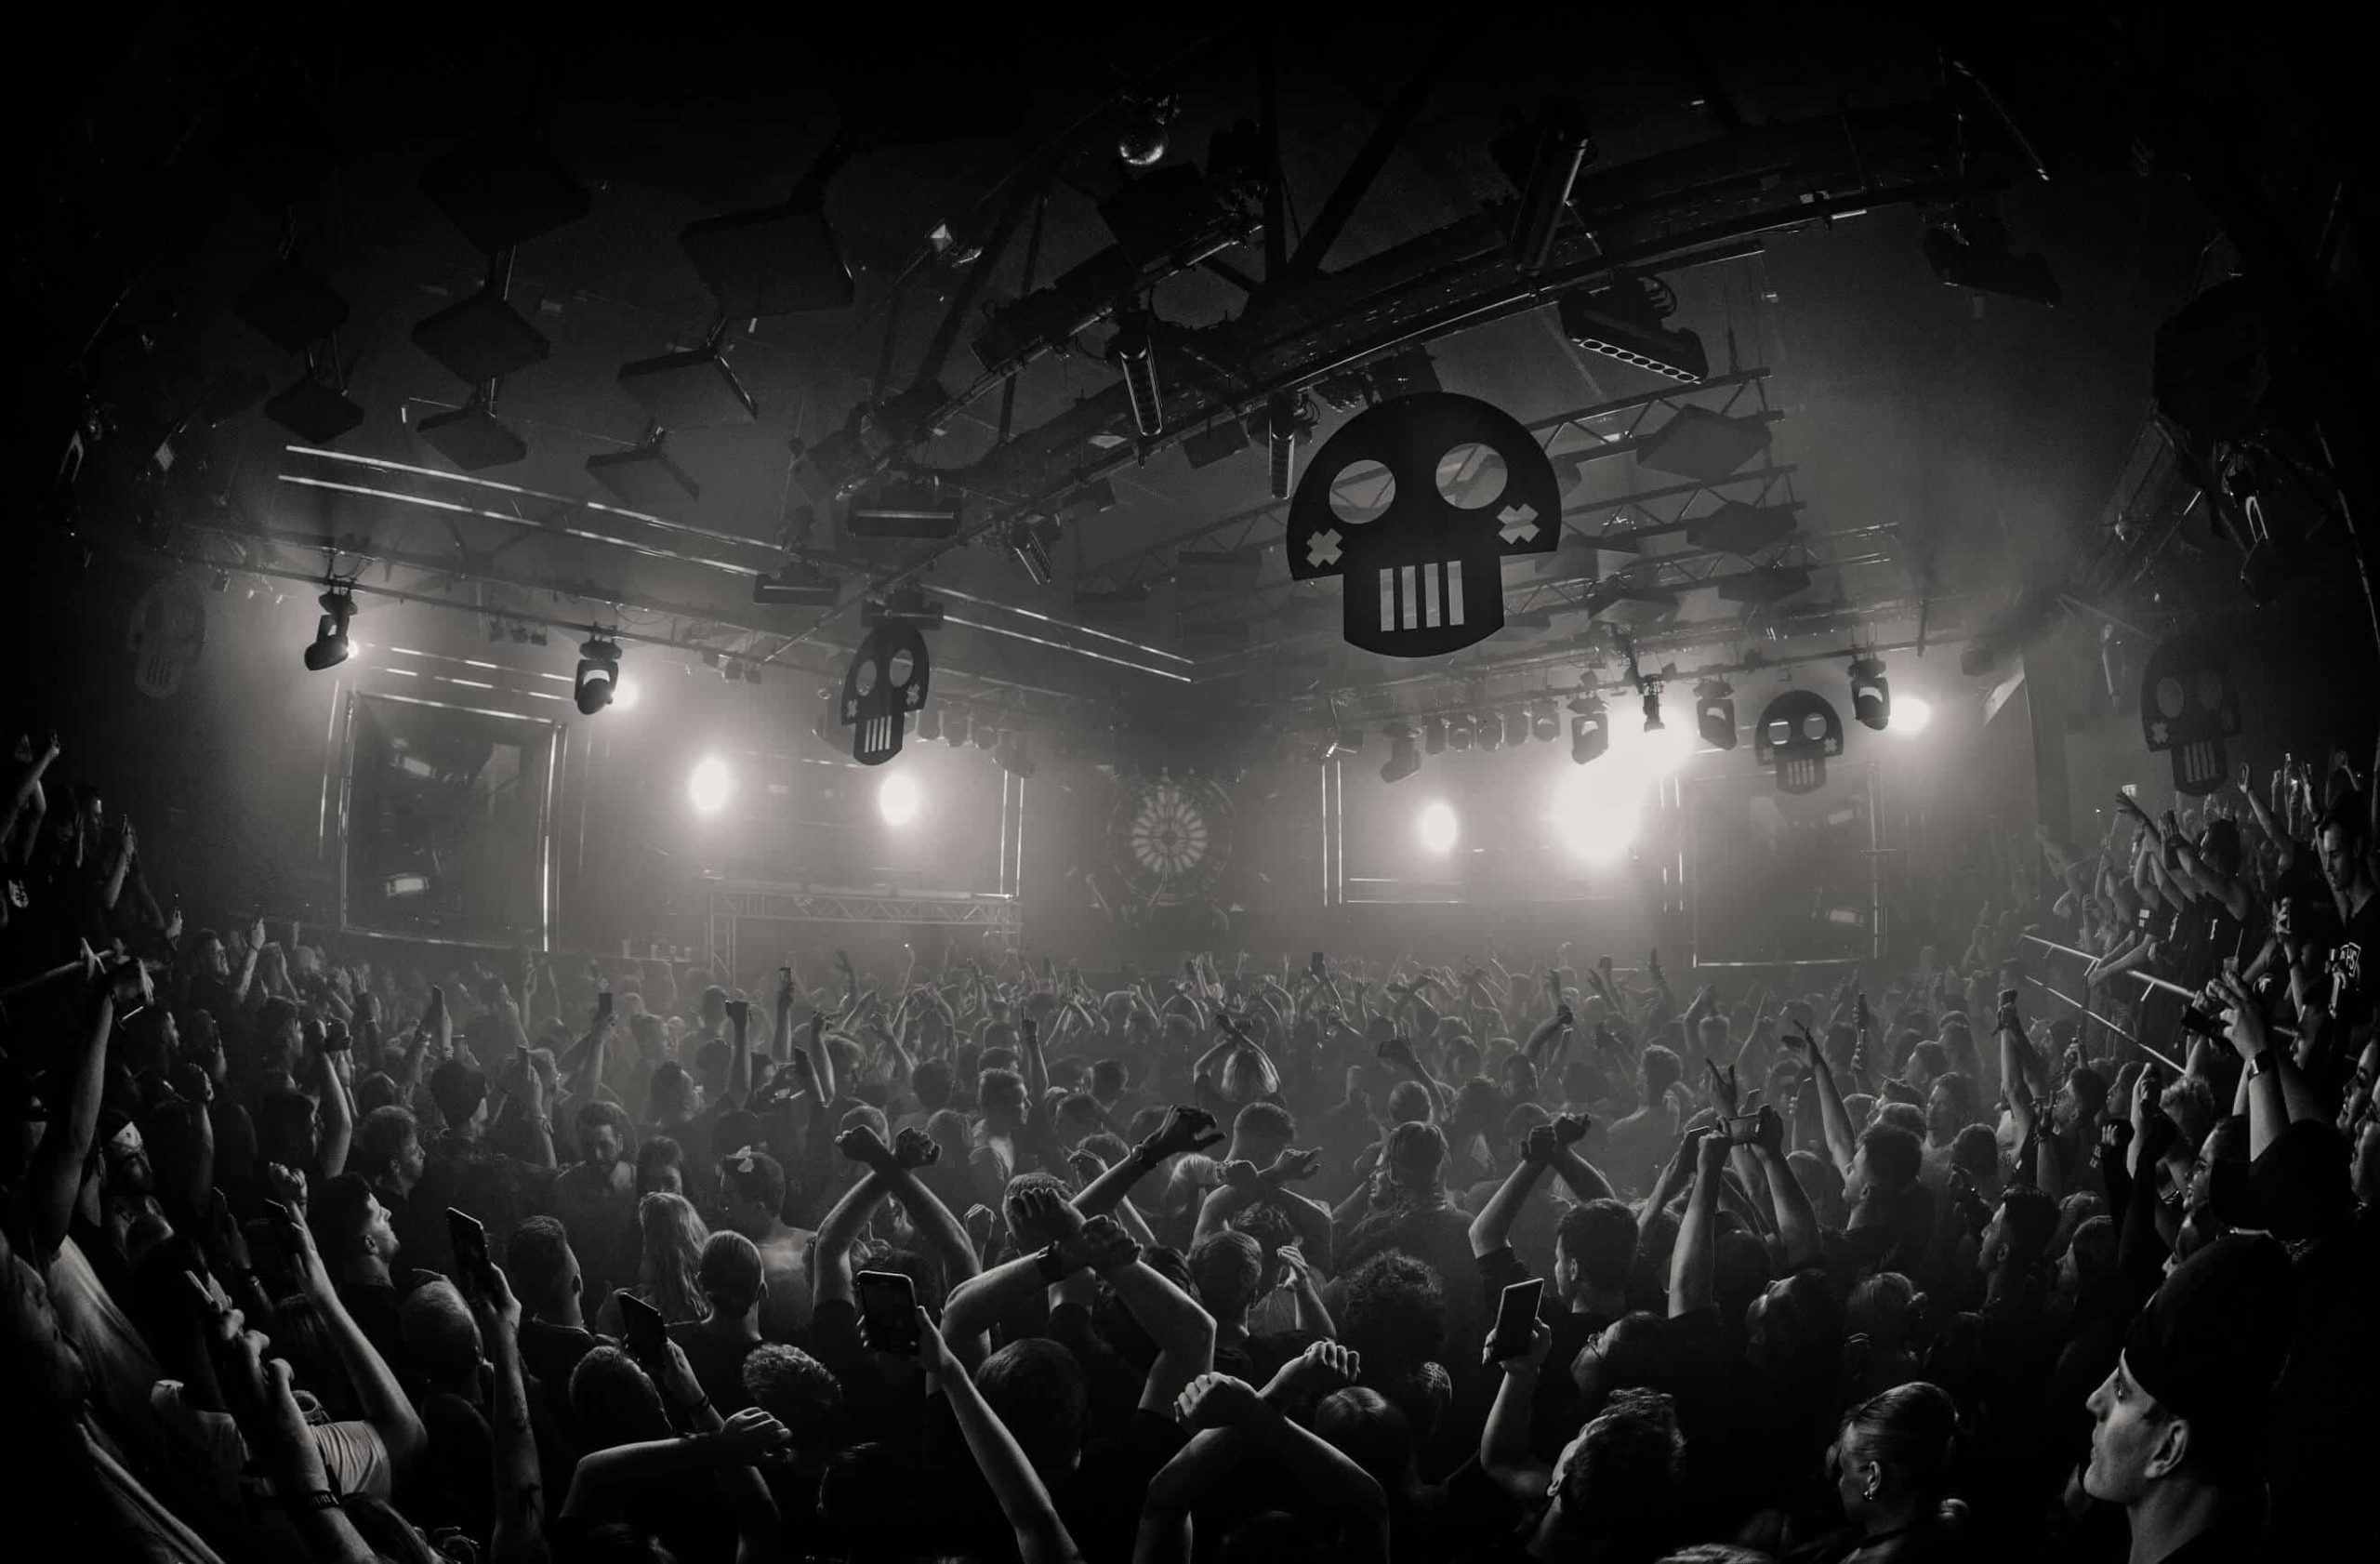 Blacklist is back to Bootshaus for a massive bass music rave